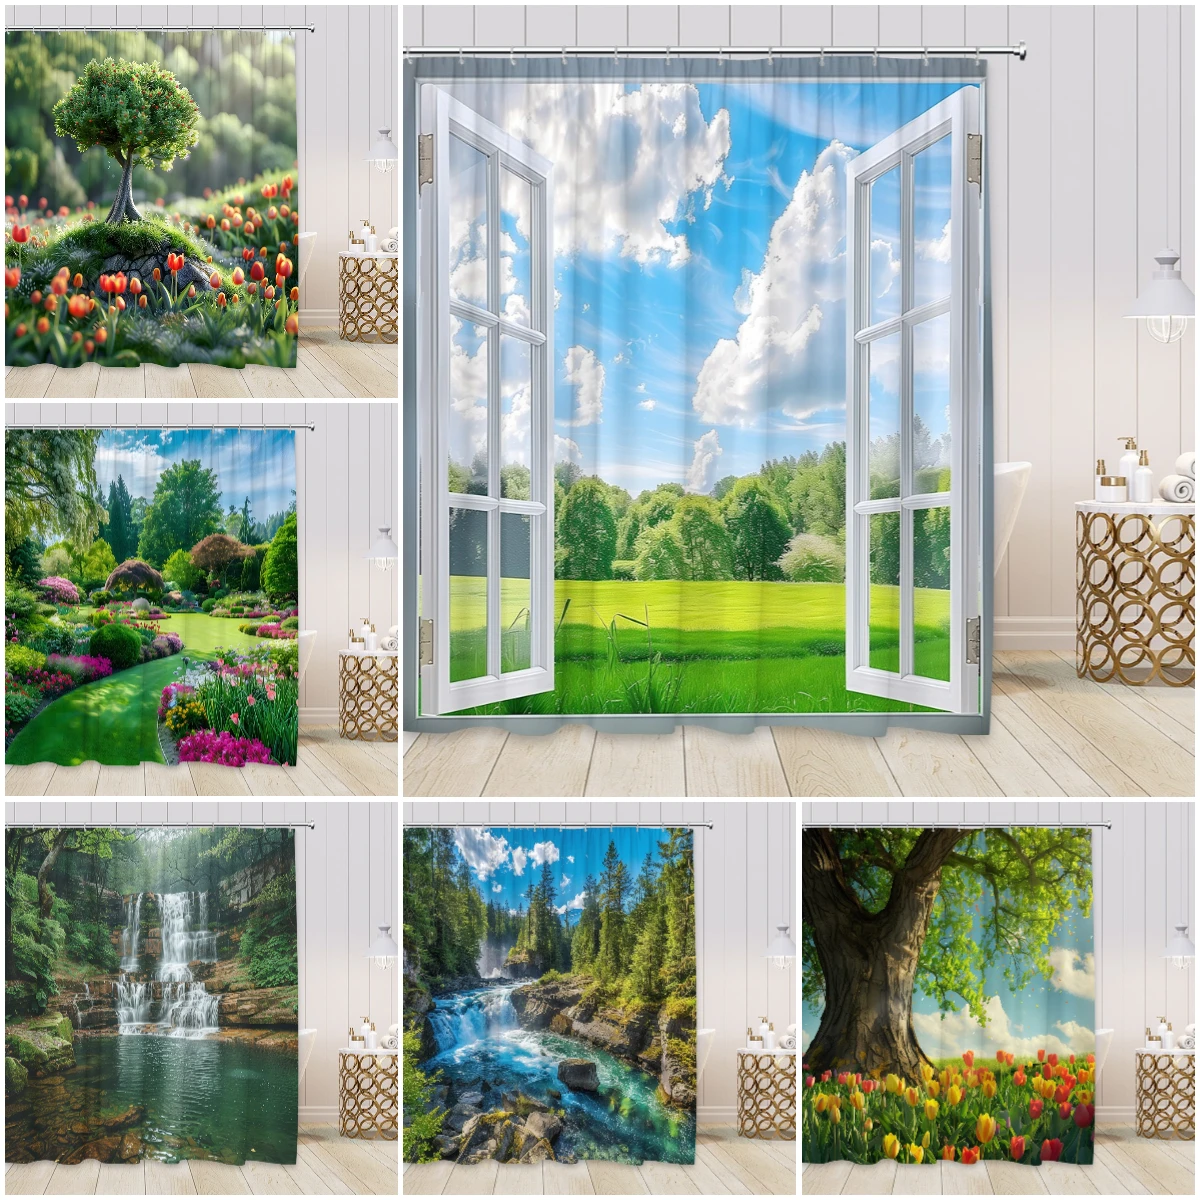 

Nature Landscape Shower Curtains Garden Lawn Scenery Waterfall Forest Polyester Bathroom Curtain Natural Home Decor for Bath